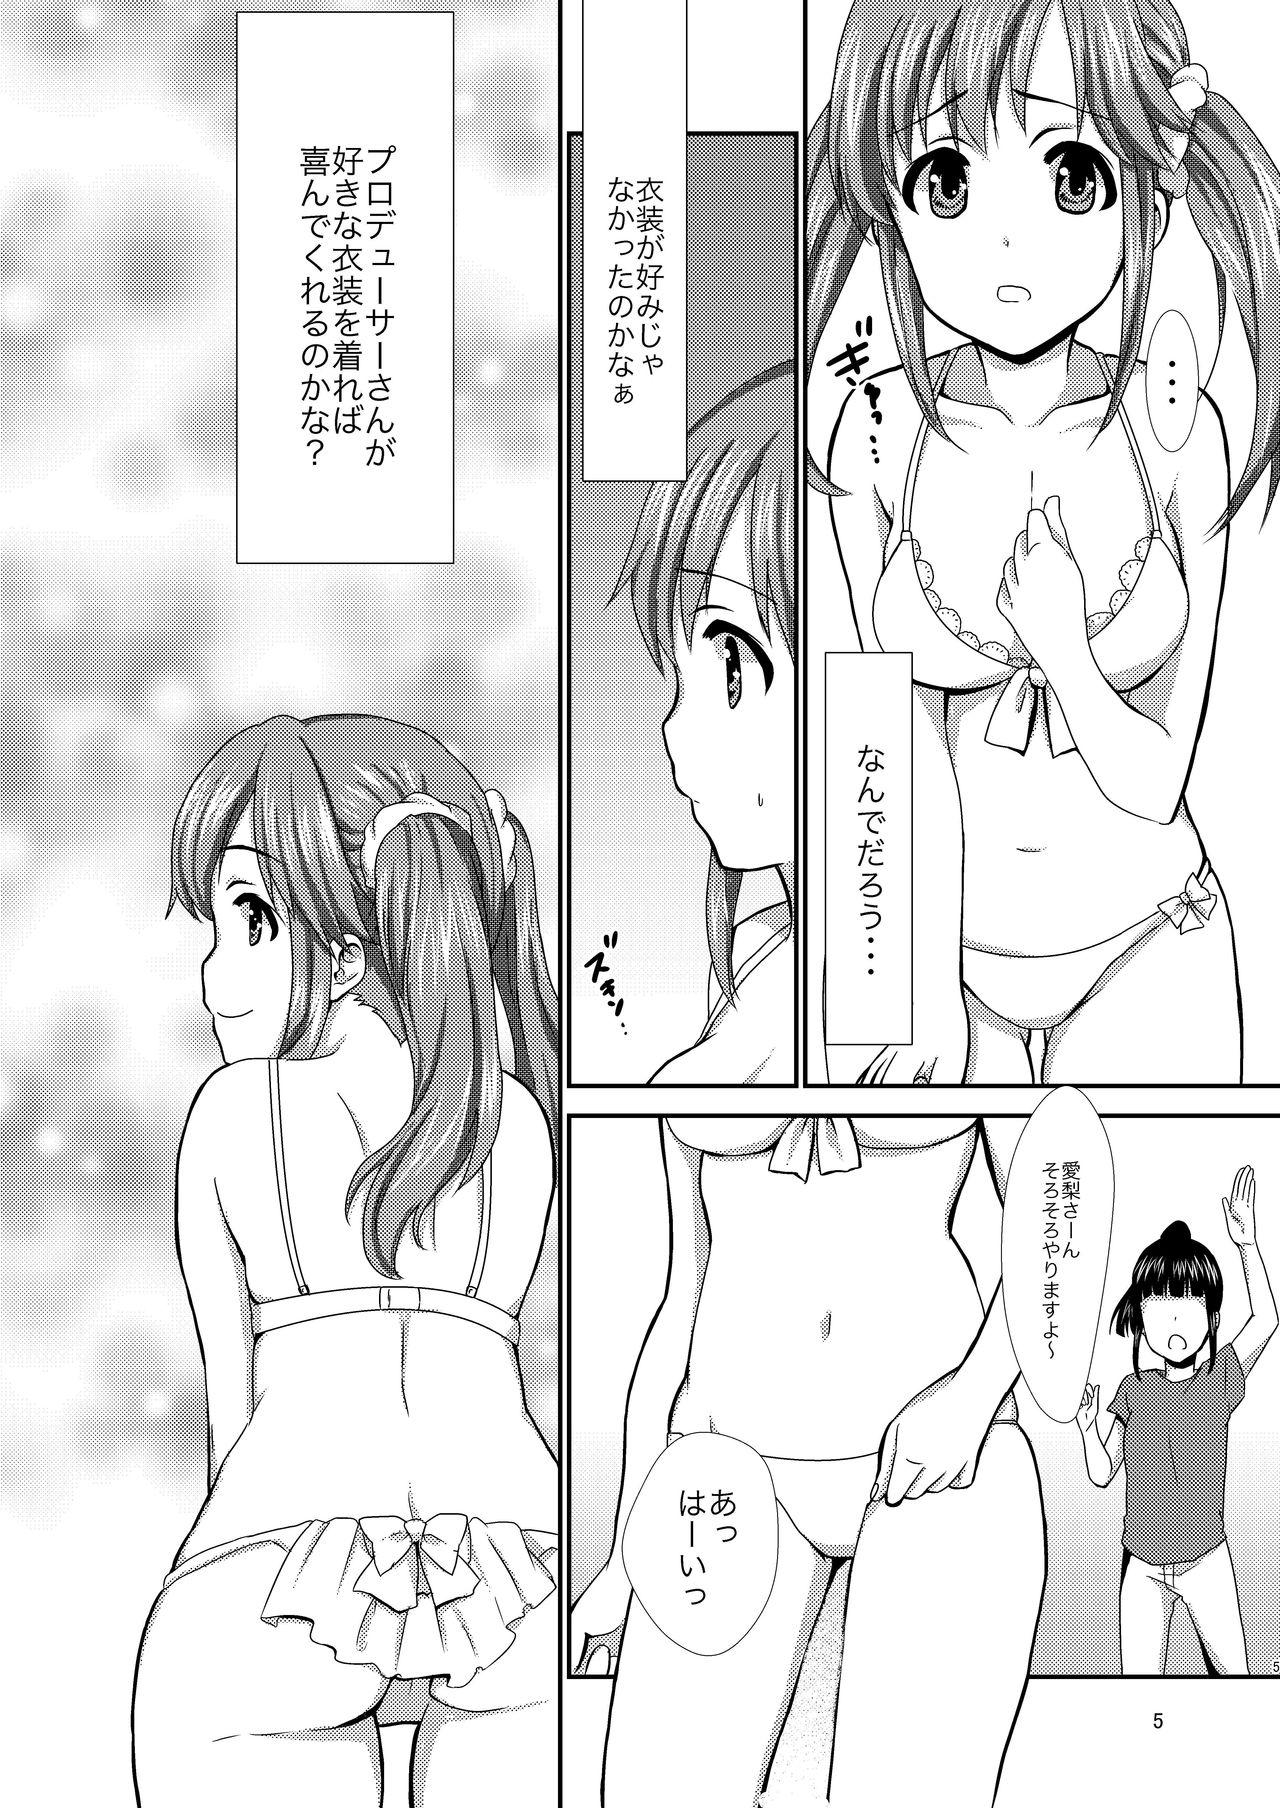 Matures office+love4 - The idolmaster Free Teenage Porn - Page 4